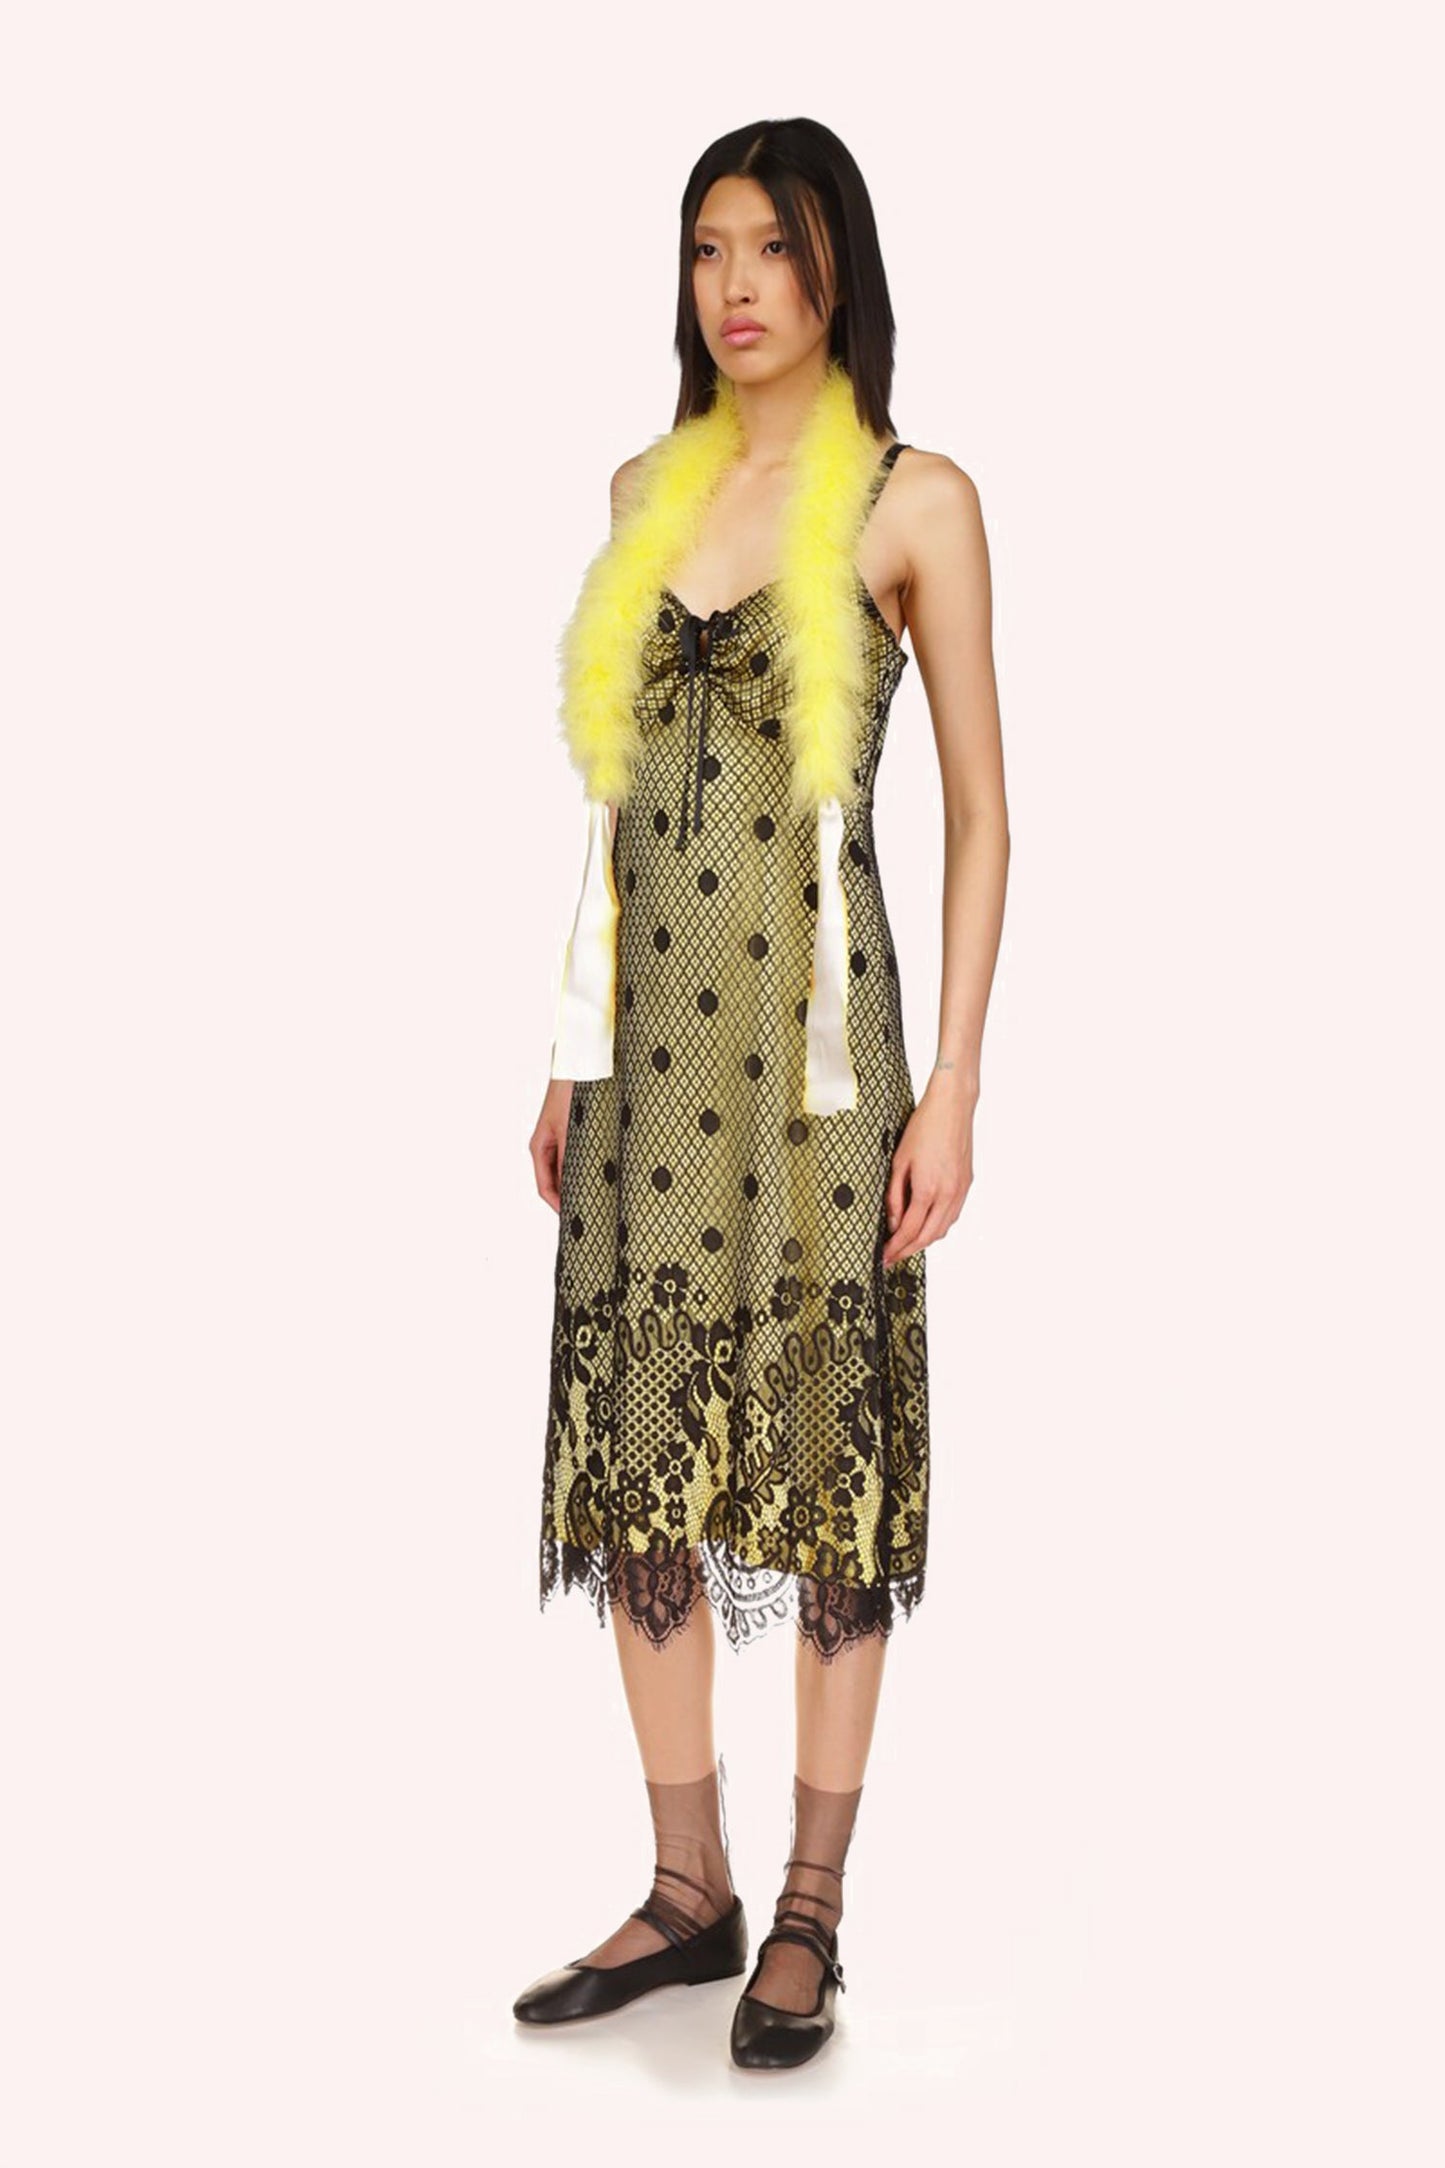 Marabou Boas Canary Yellow, It's a fake fur scarf that pair amazingly well with Anna Sui dresses 